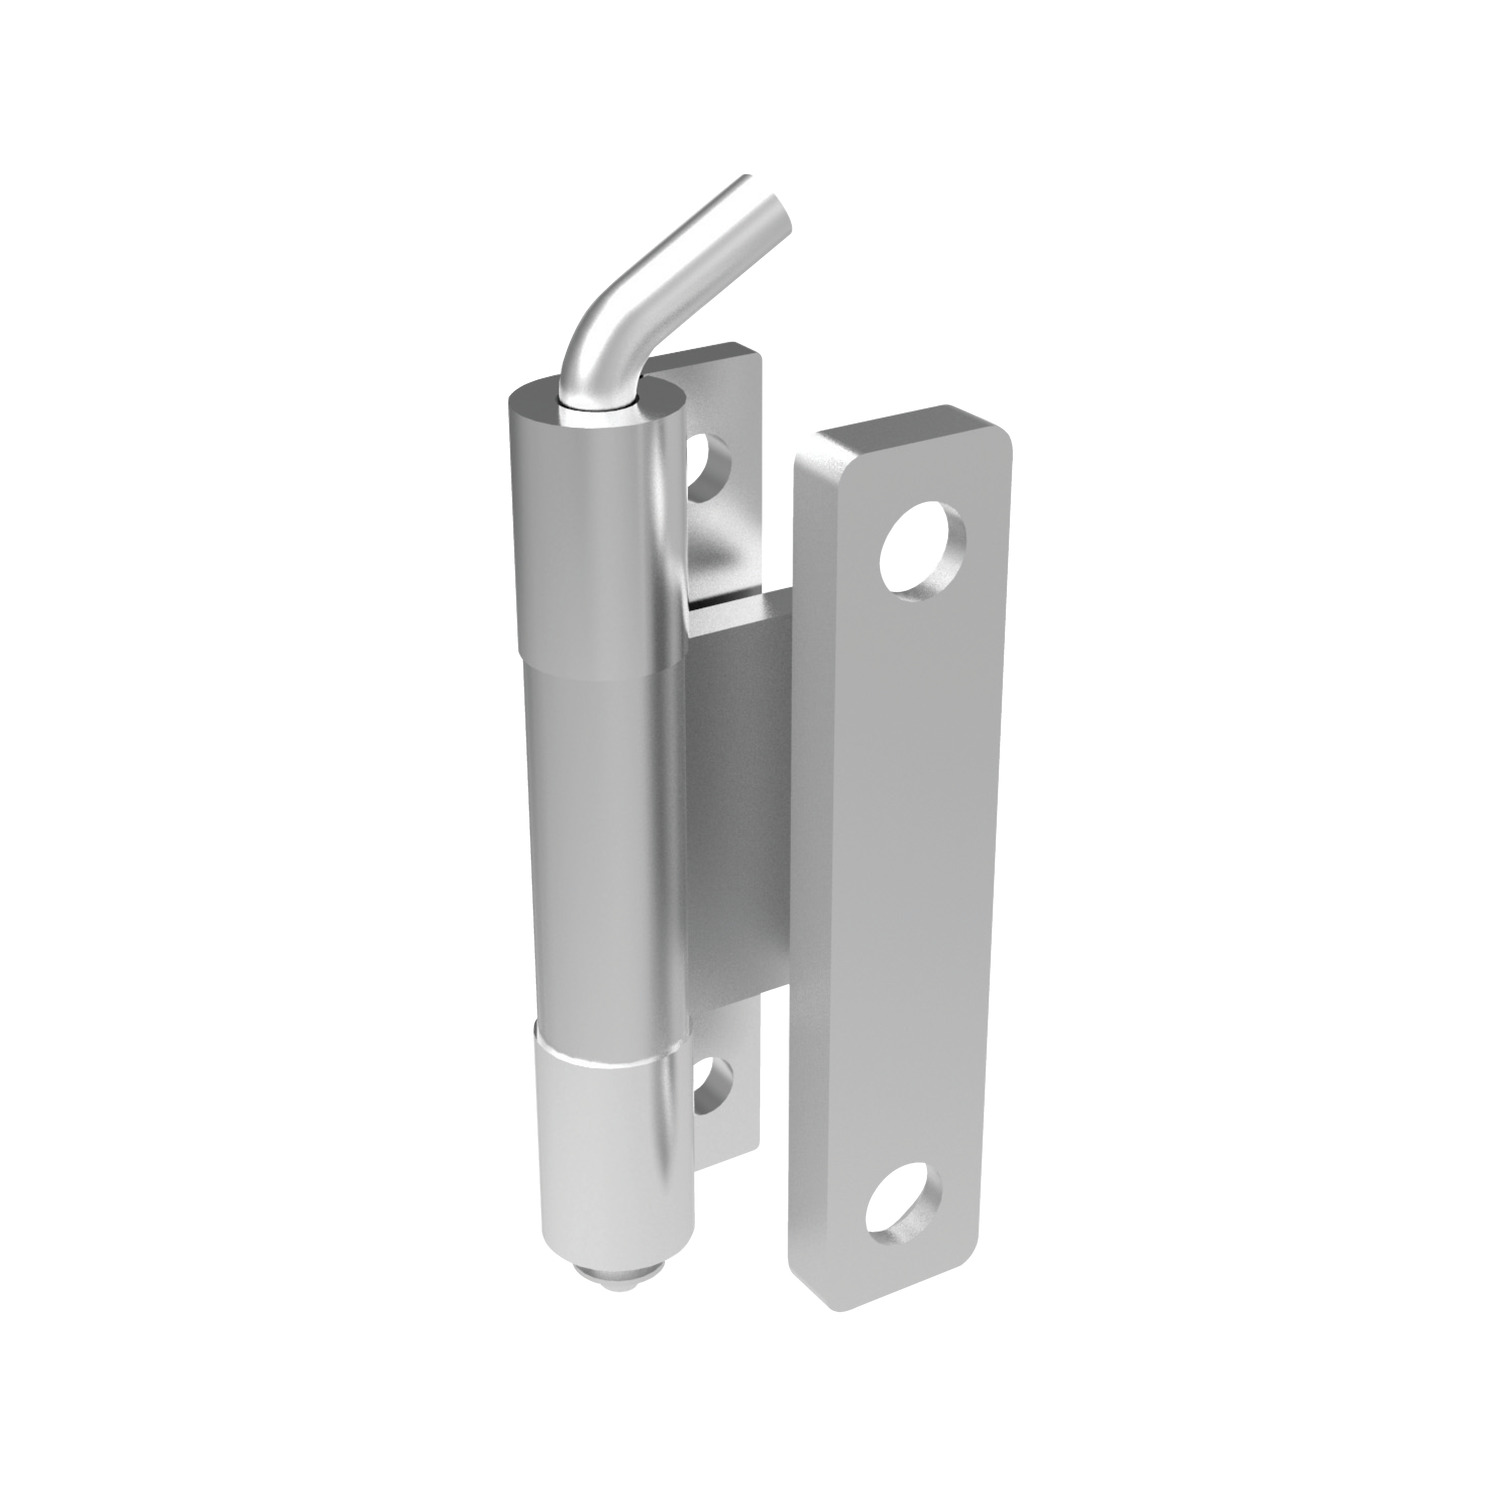 S2115.AW0024 Concealed Pivot Hinges weld and countersunk screw